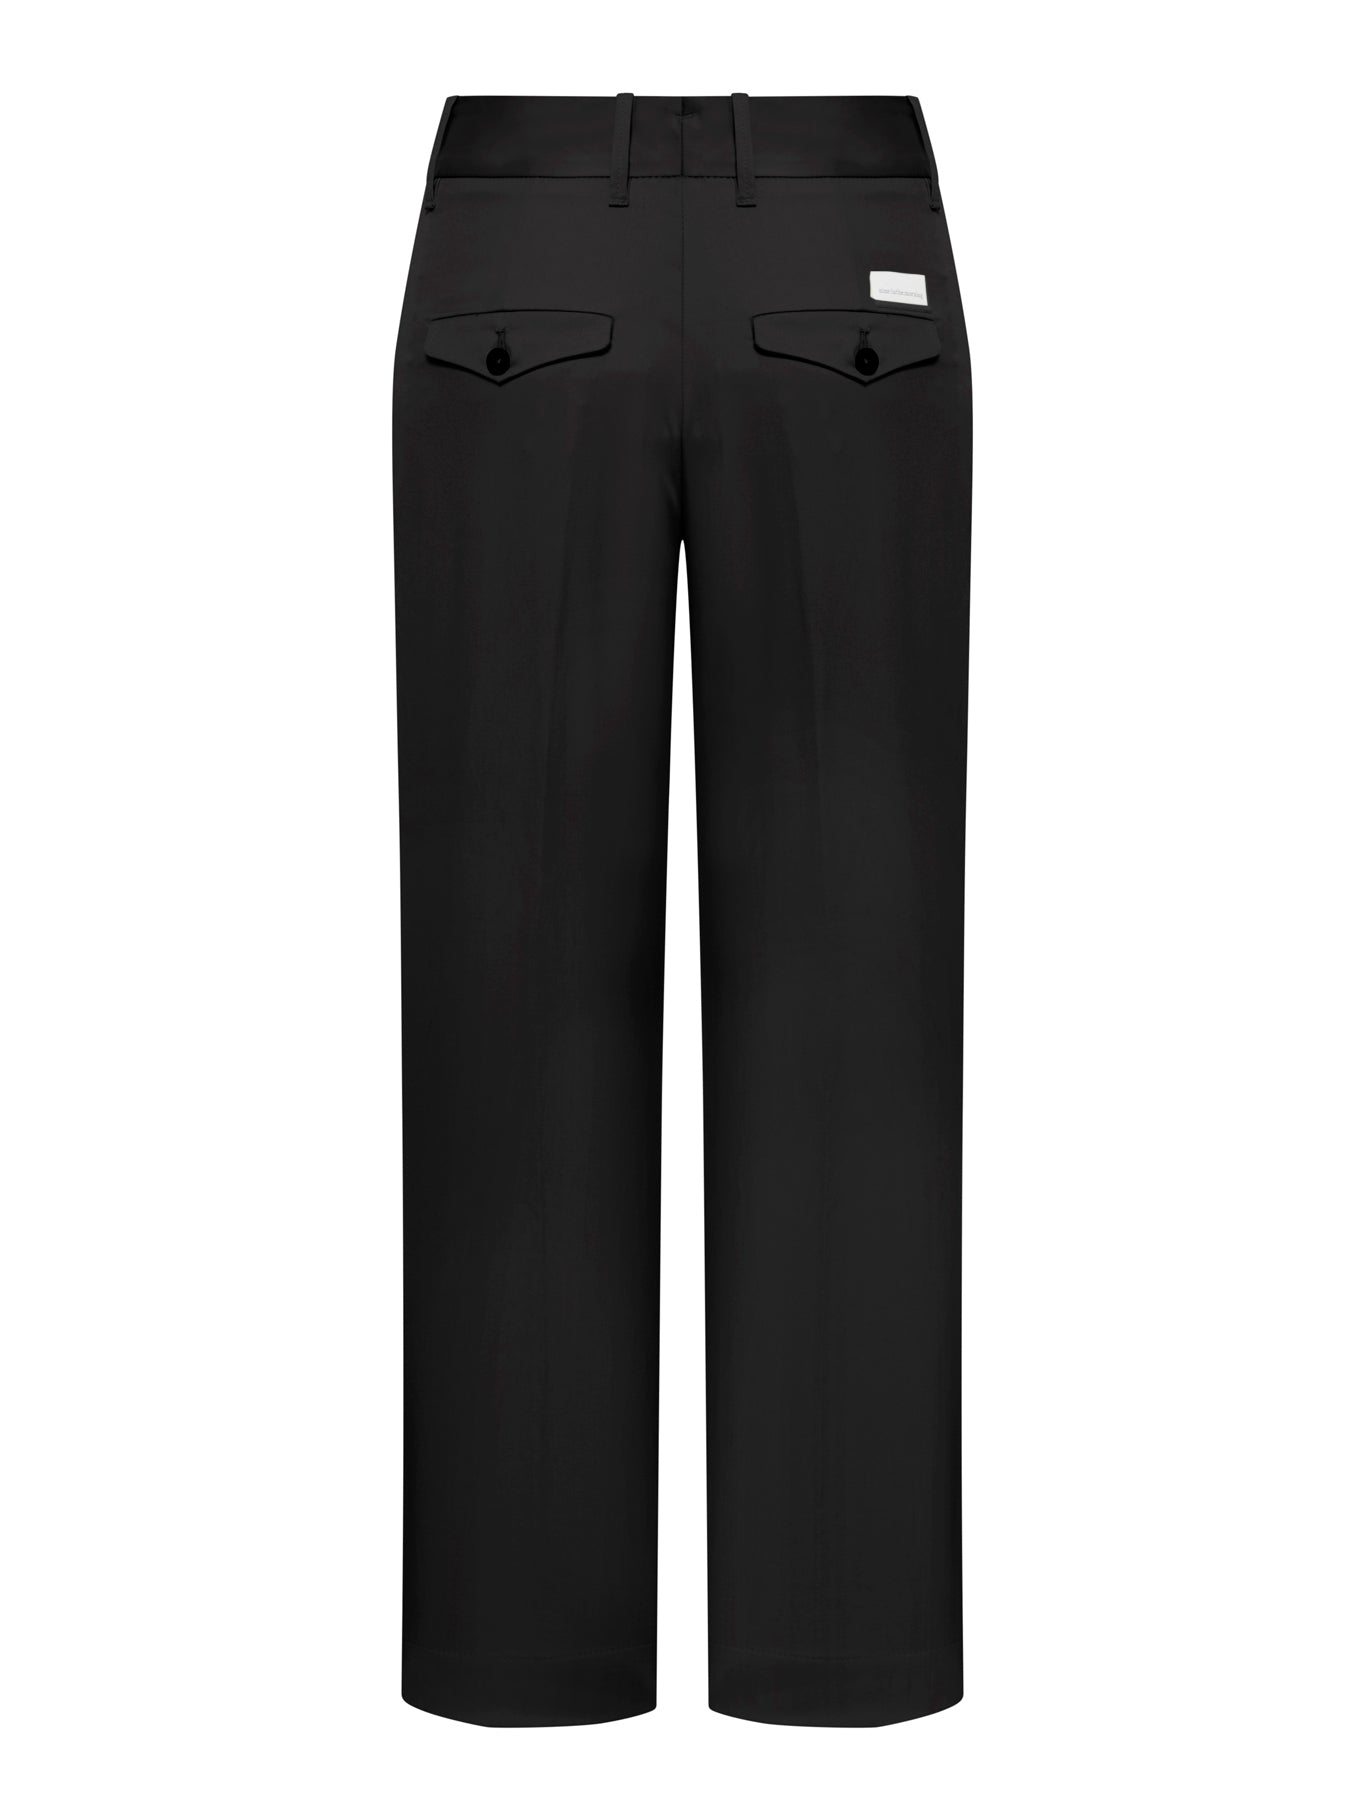 TROUSERS IN COTTON